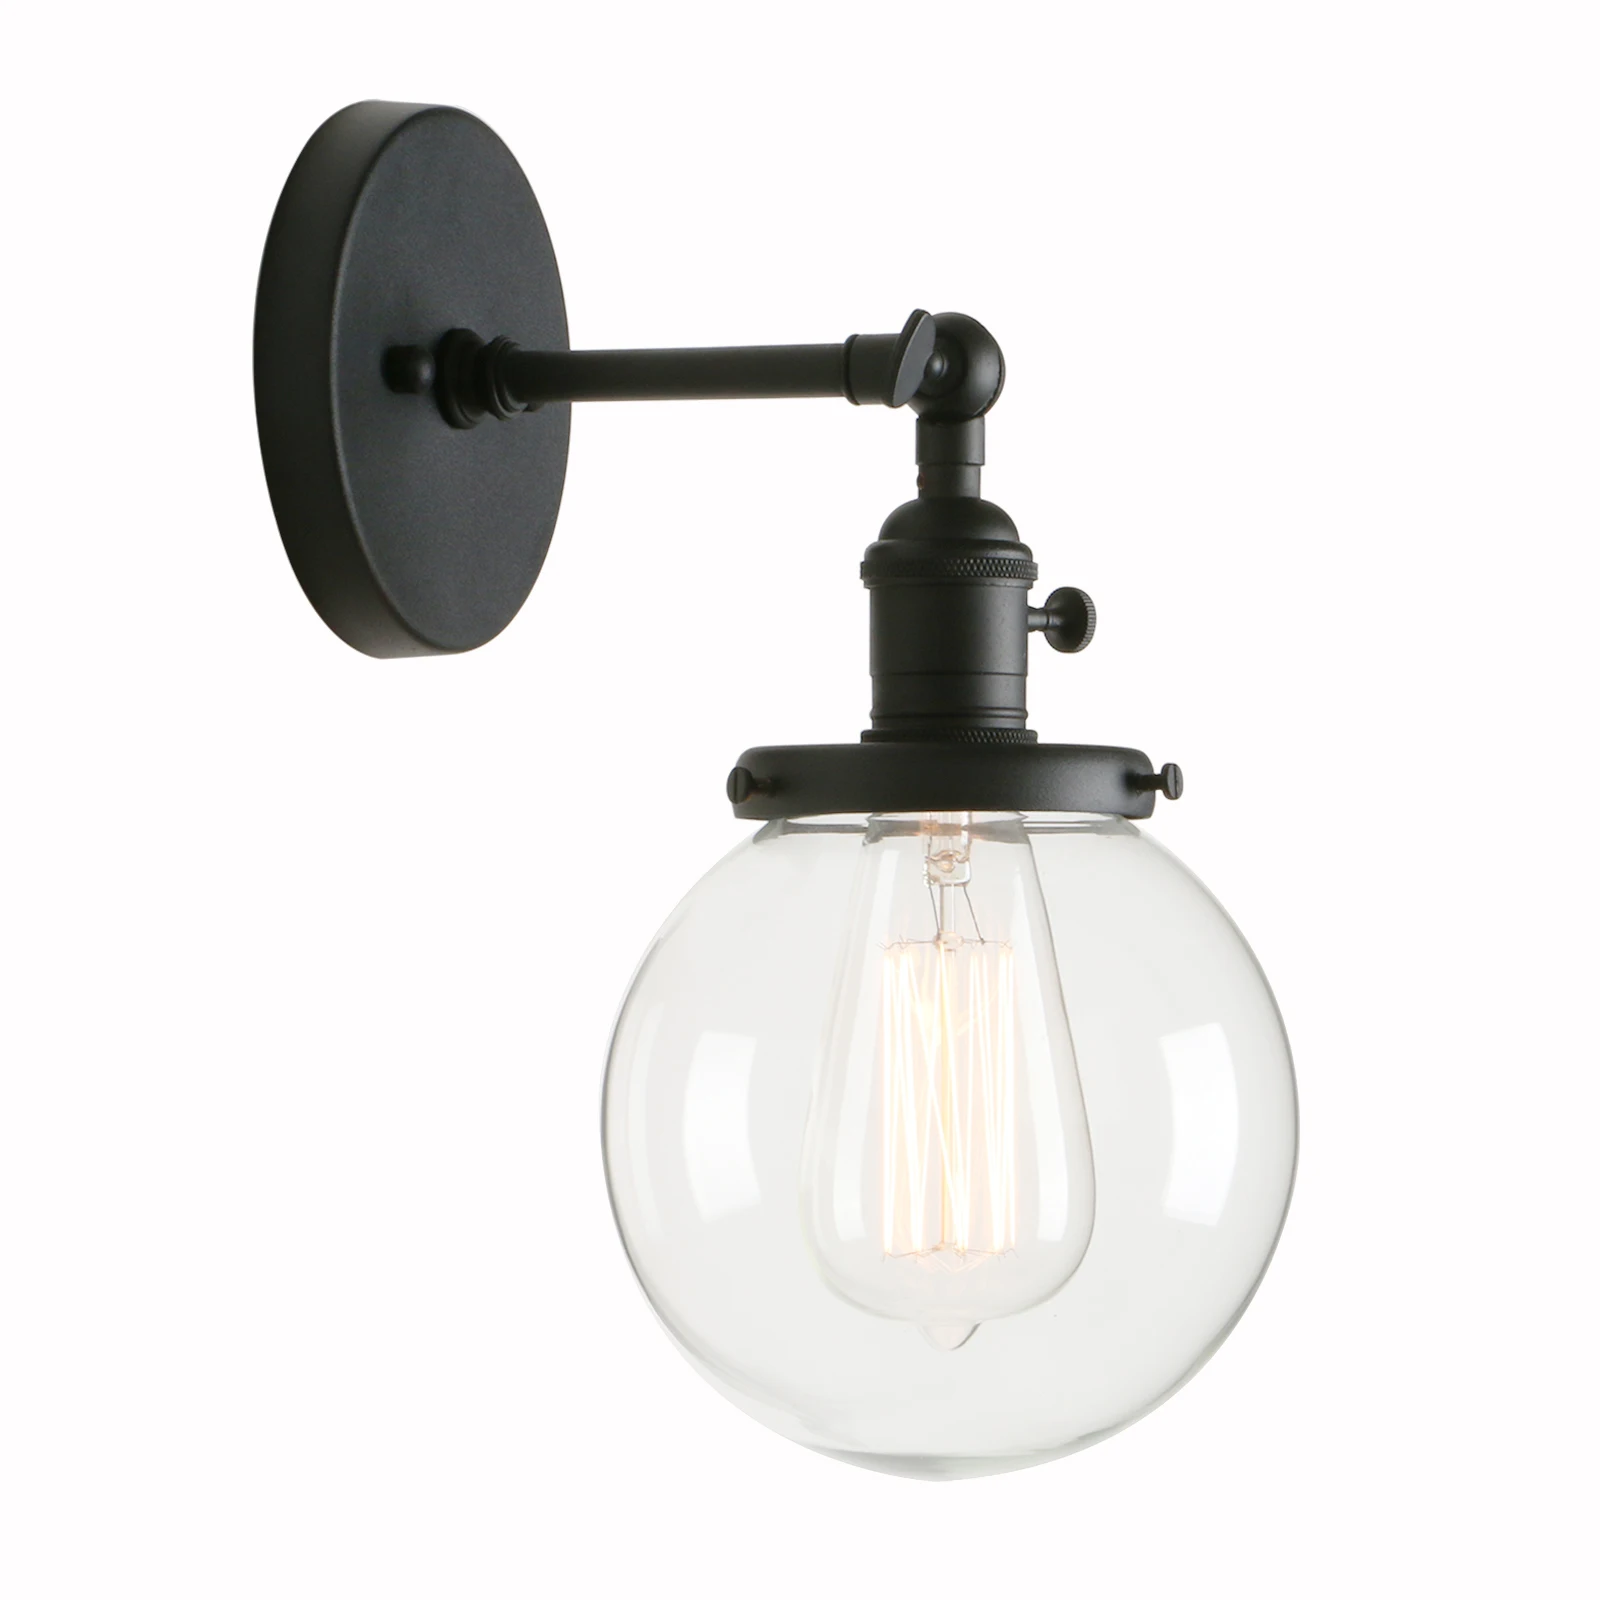 

Phansthy Vintage Industrial Wall Sconce Lighting Fixture with Mini 5.9" Round Clear Glass Globe Hand Blown Shade (Black)